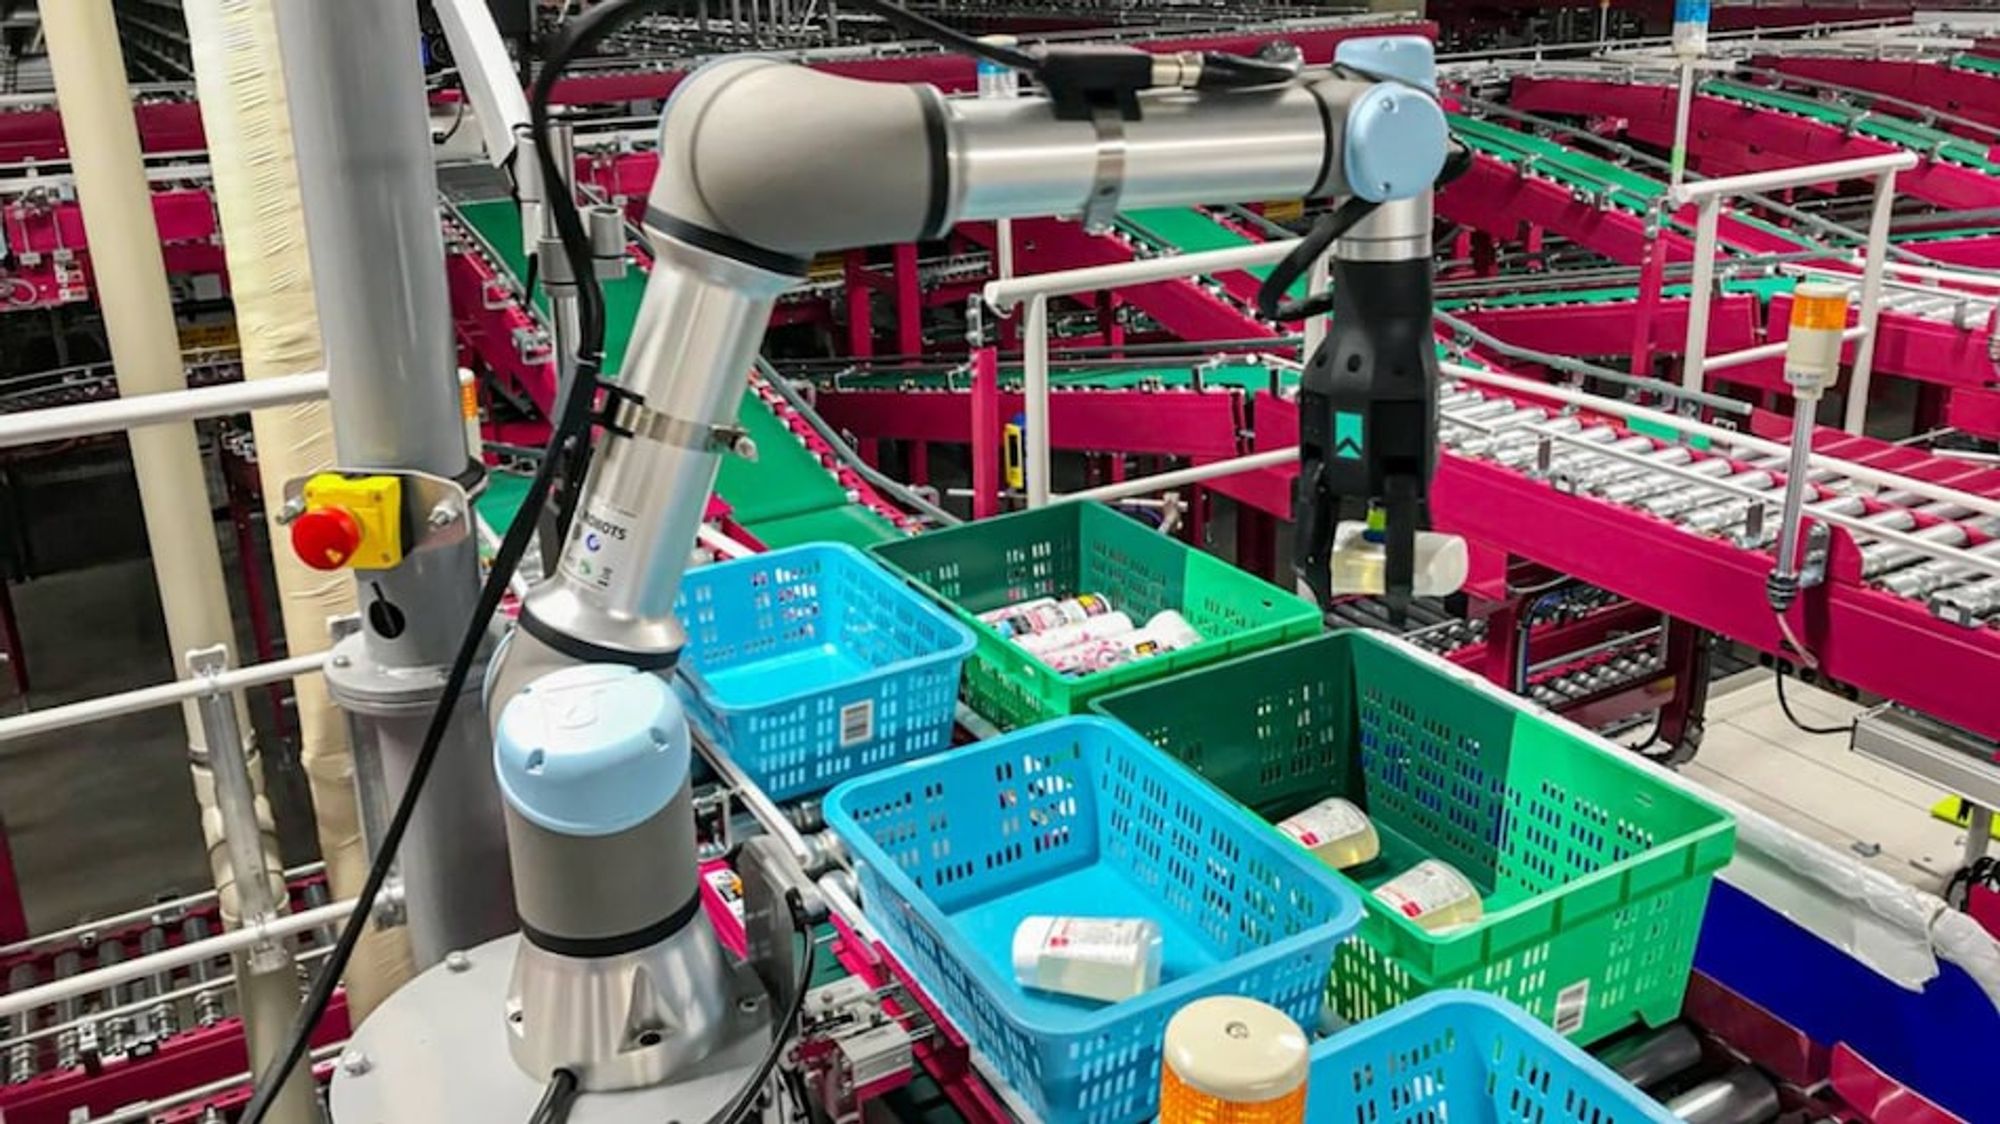 This Robot May Just Be What Retailers Need in Their Warehouses | Technology News